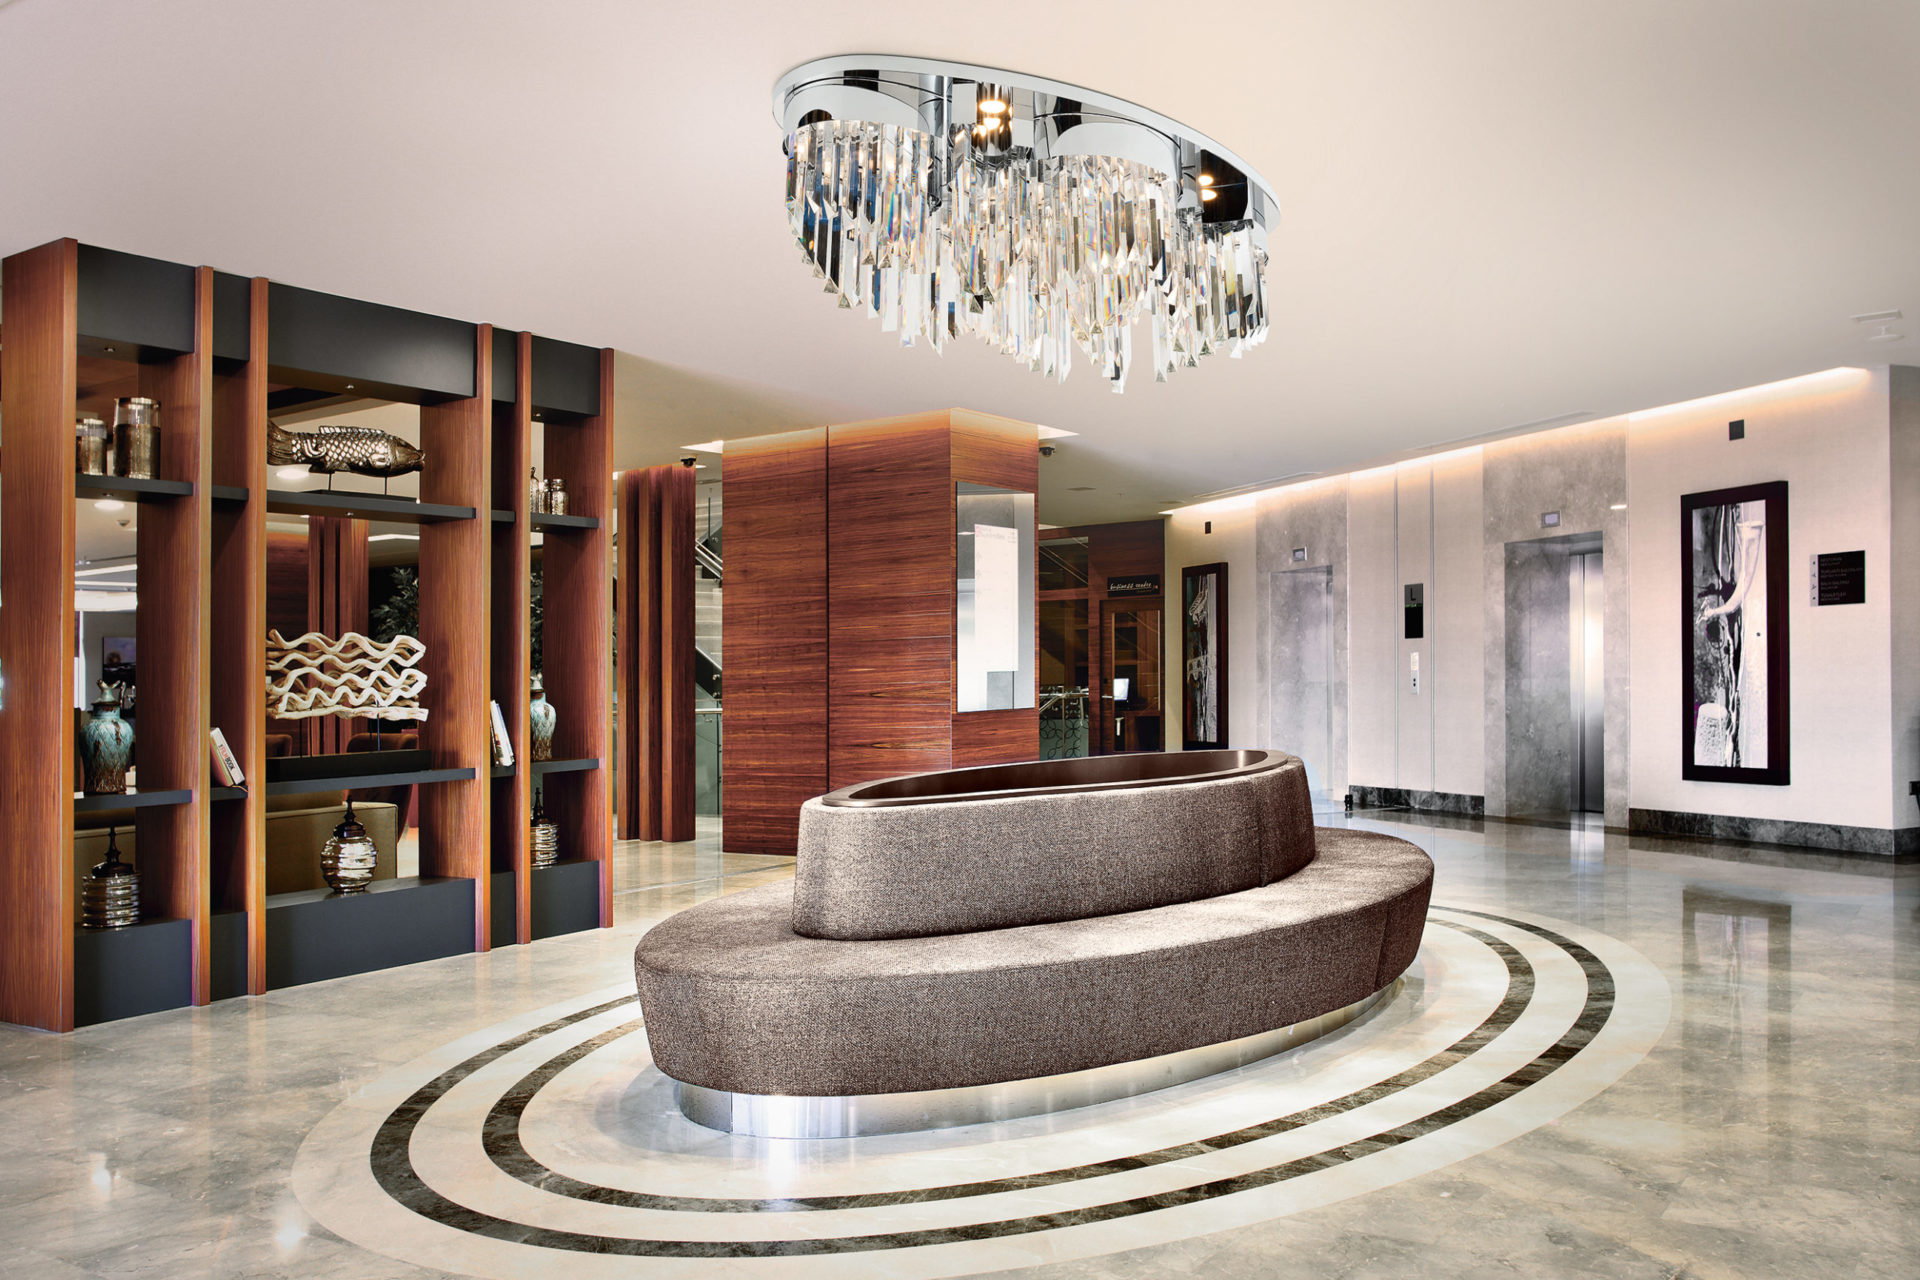 Lighting for Hotels: a harmonious balance between scenic and technical aspects